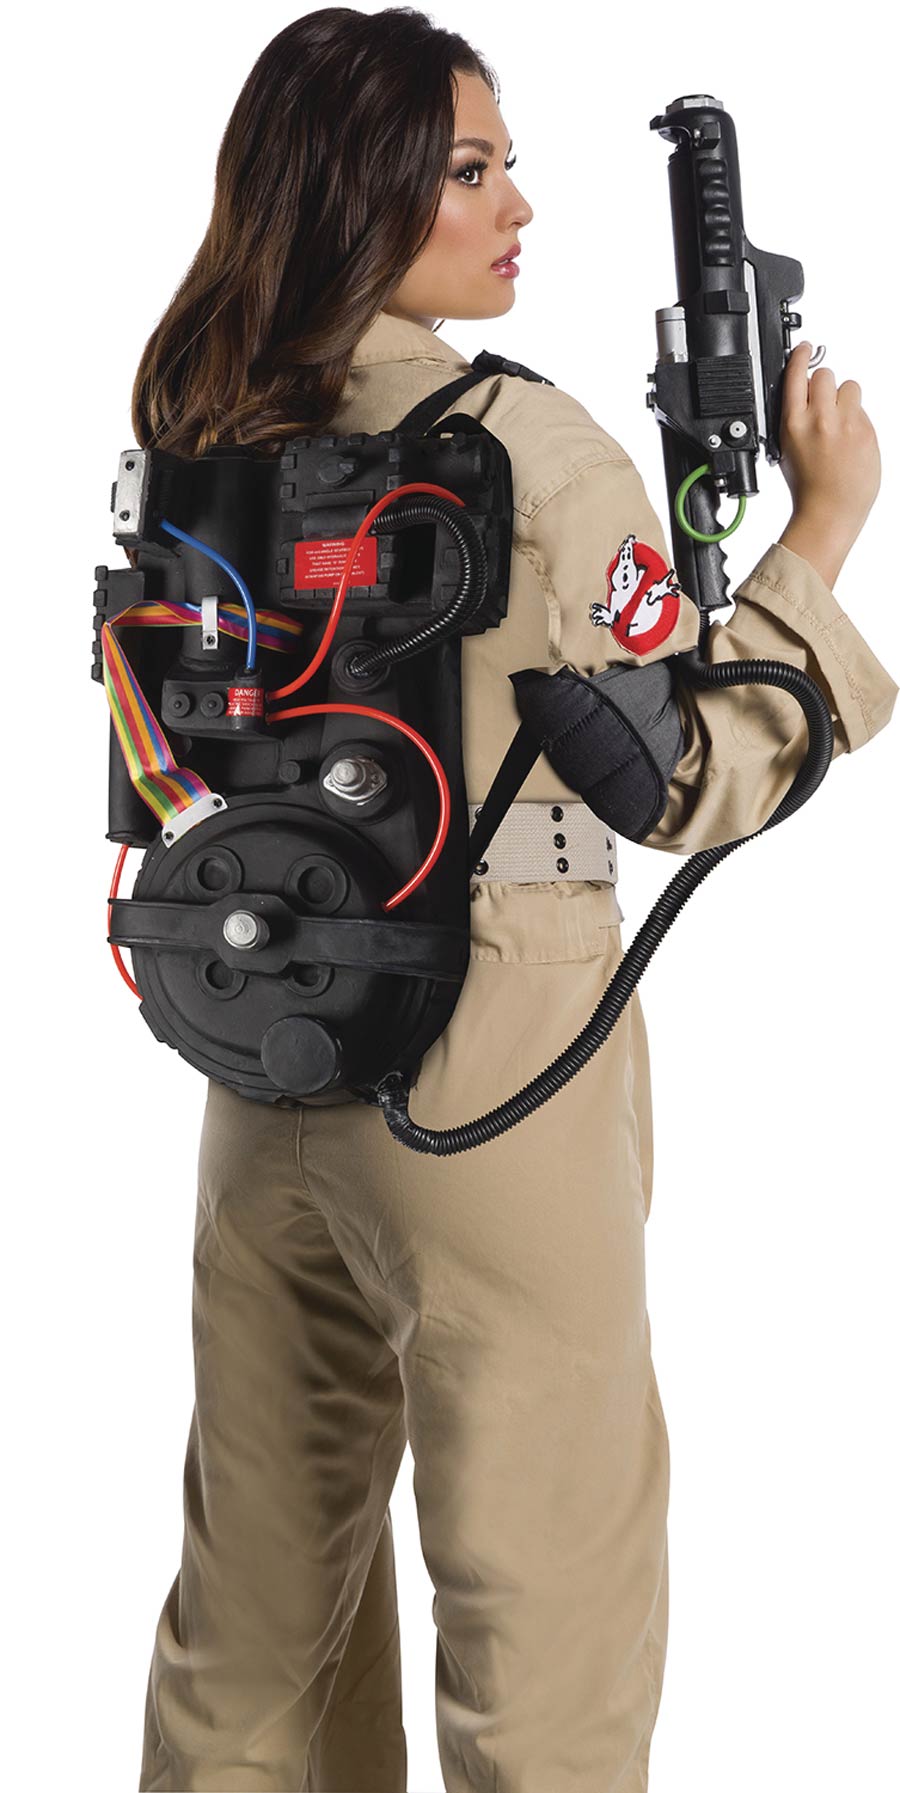 Ghostbusters Proton Pack Prop Replica